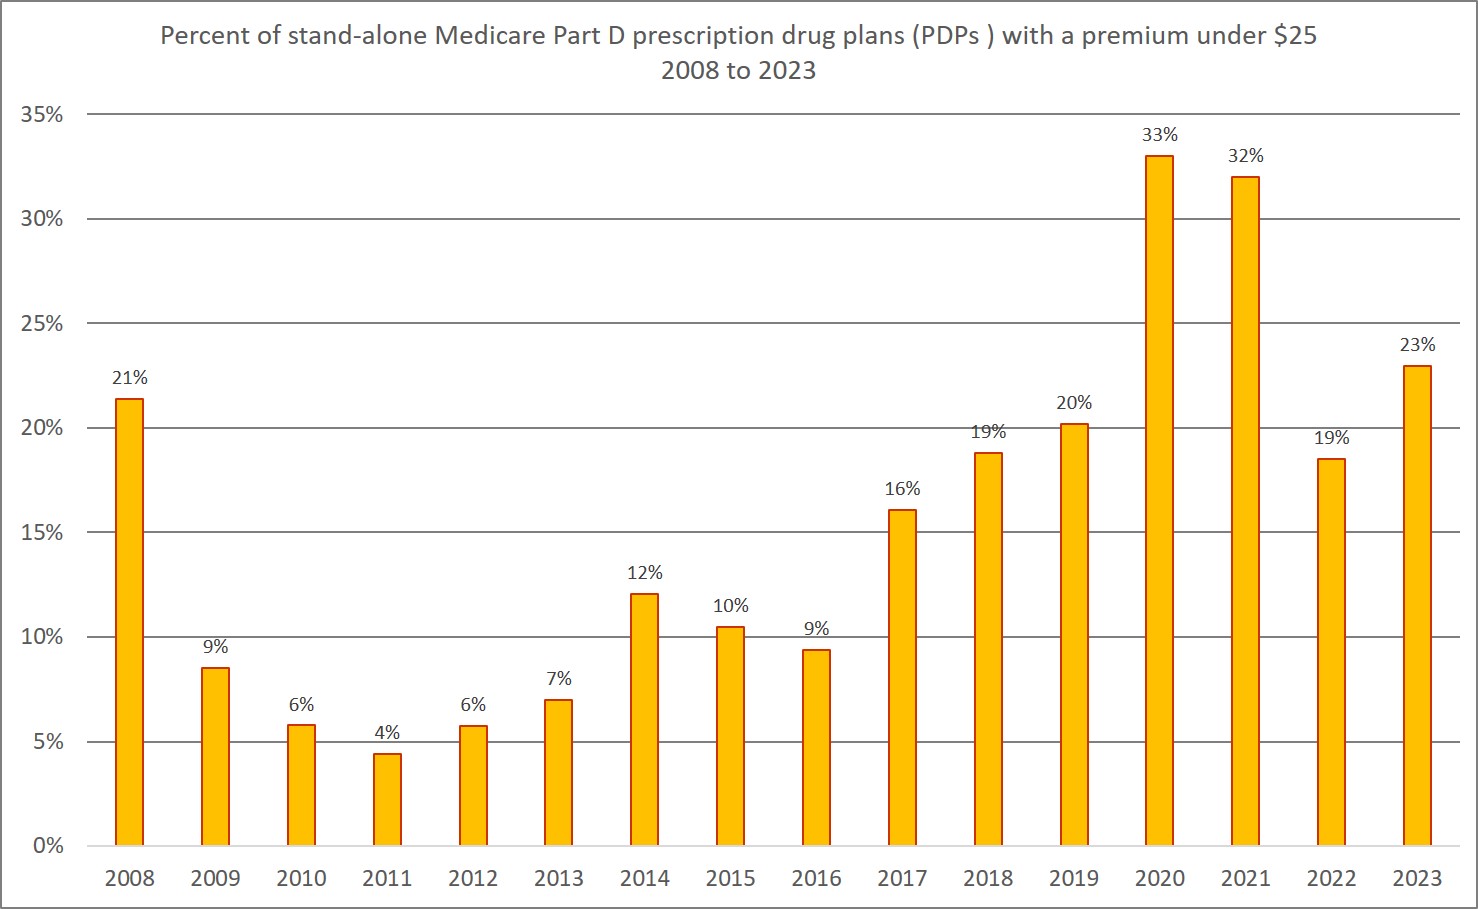 Percentage of PDPs with premiums under $25 2008 to 2023